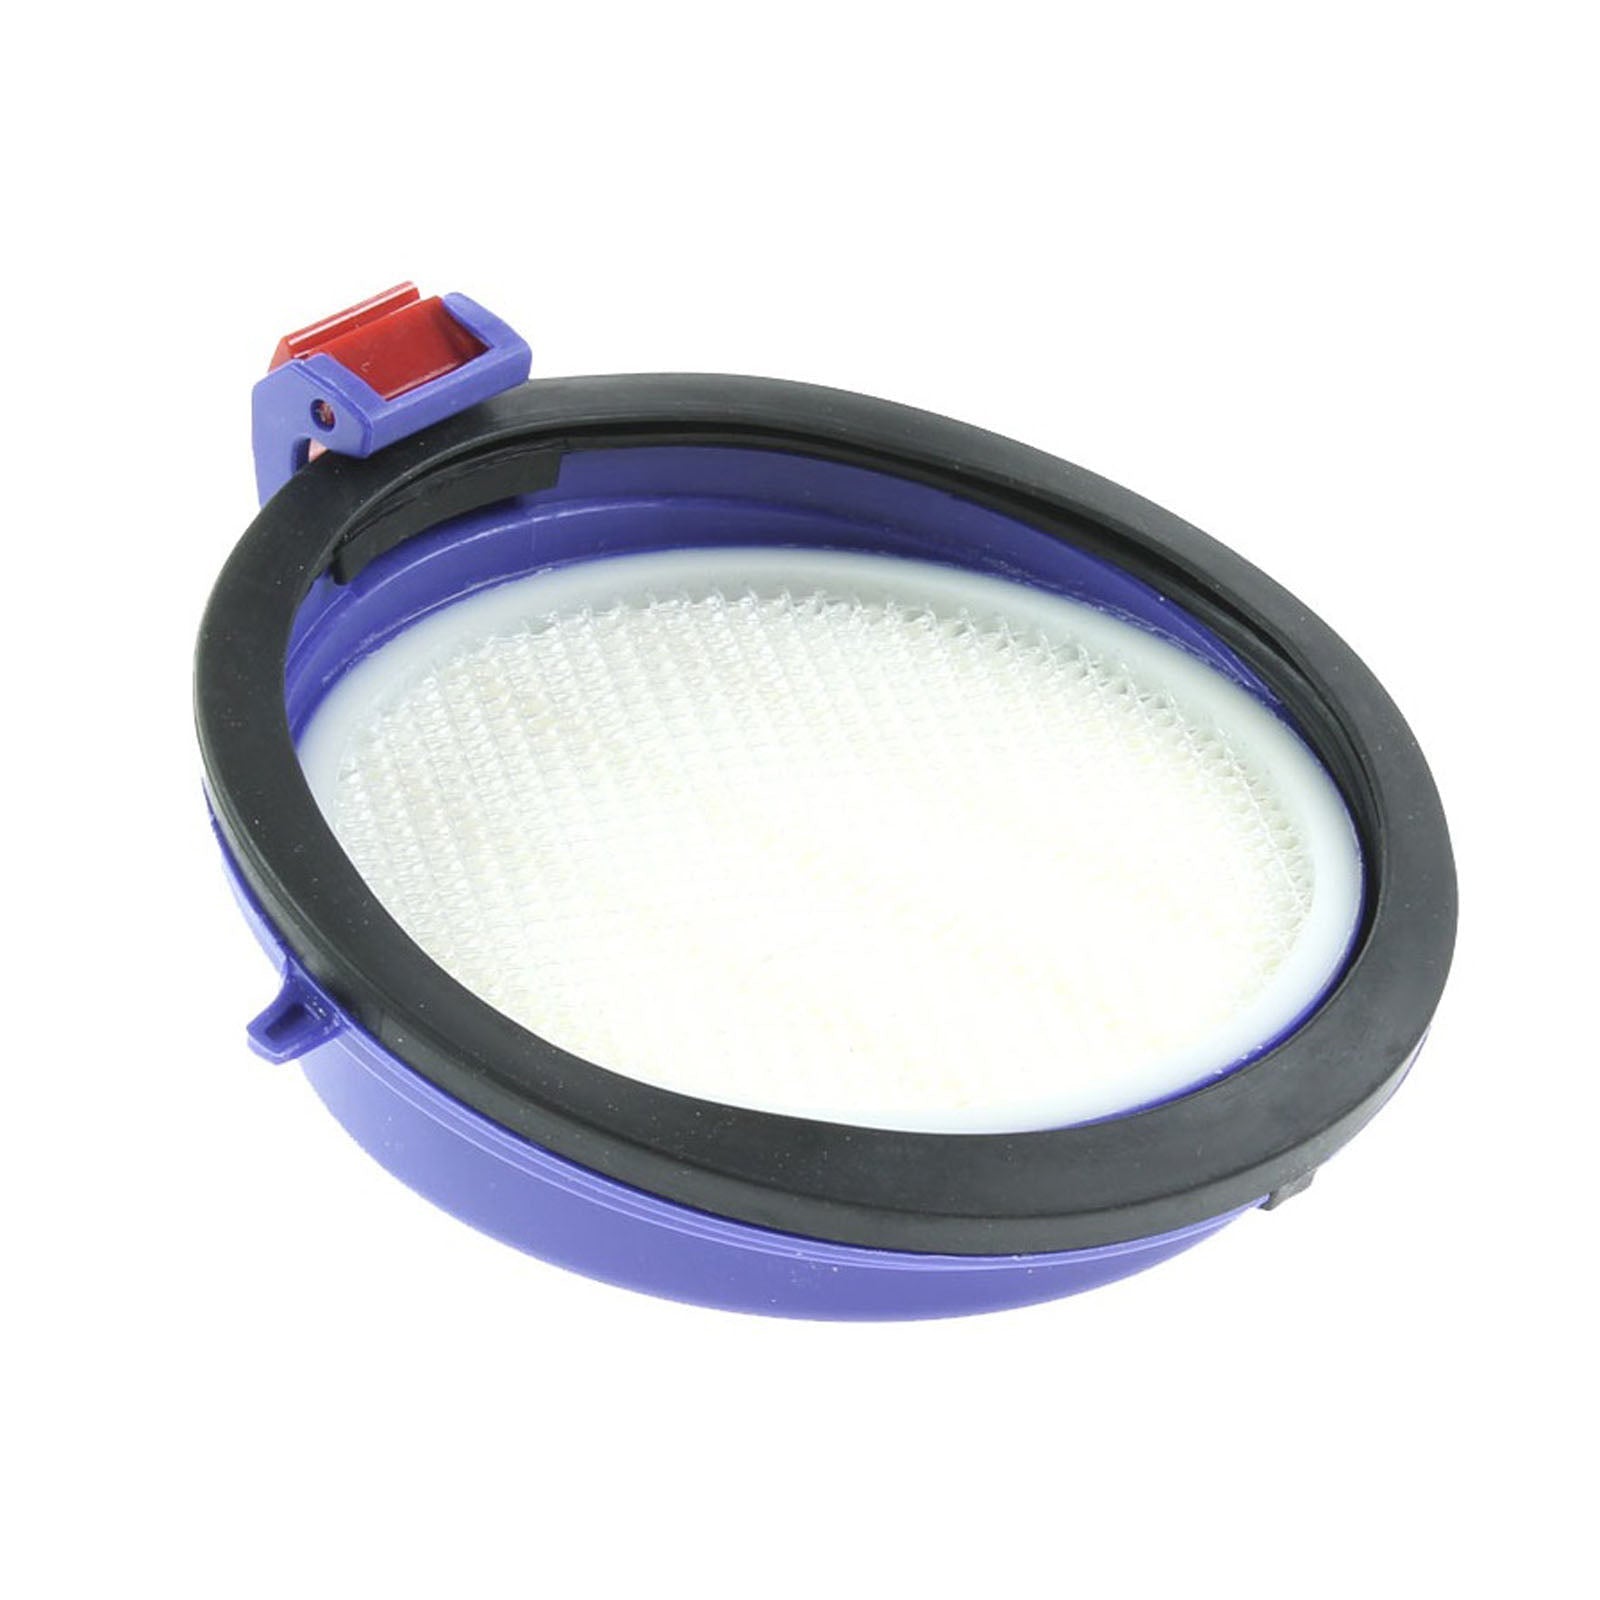 HEPA Post Motor Filter compatible with DYSON DC25 DC25i Vacuum Cleaner